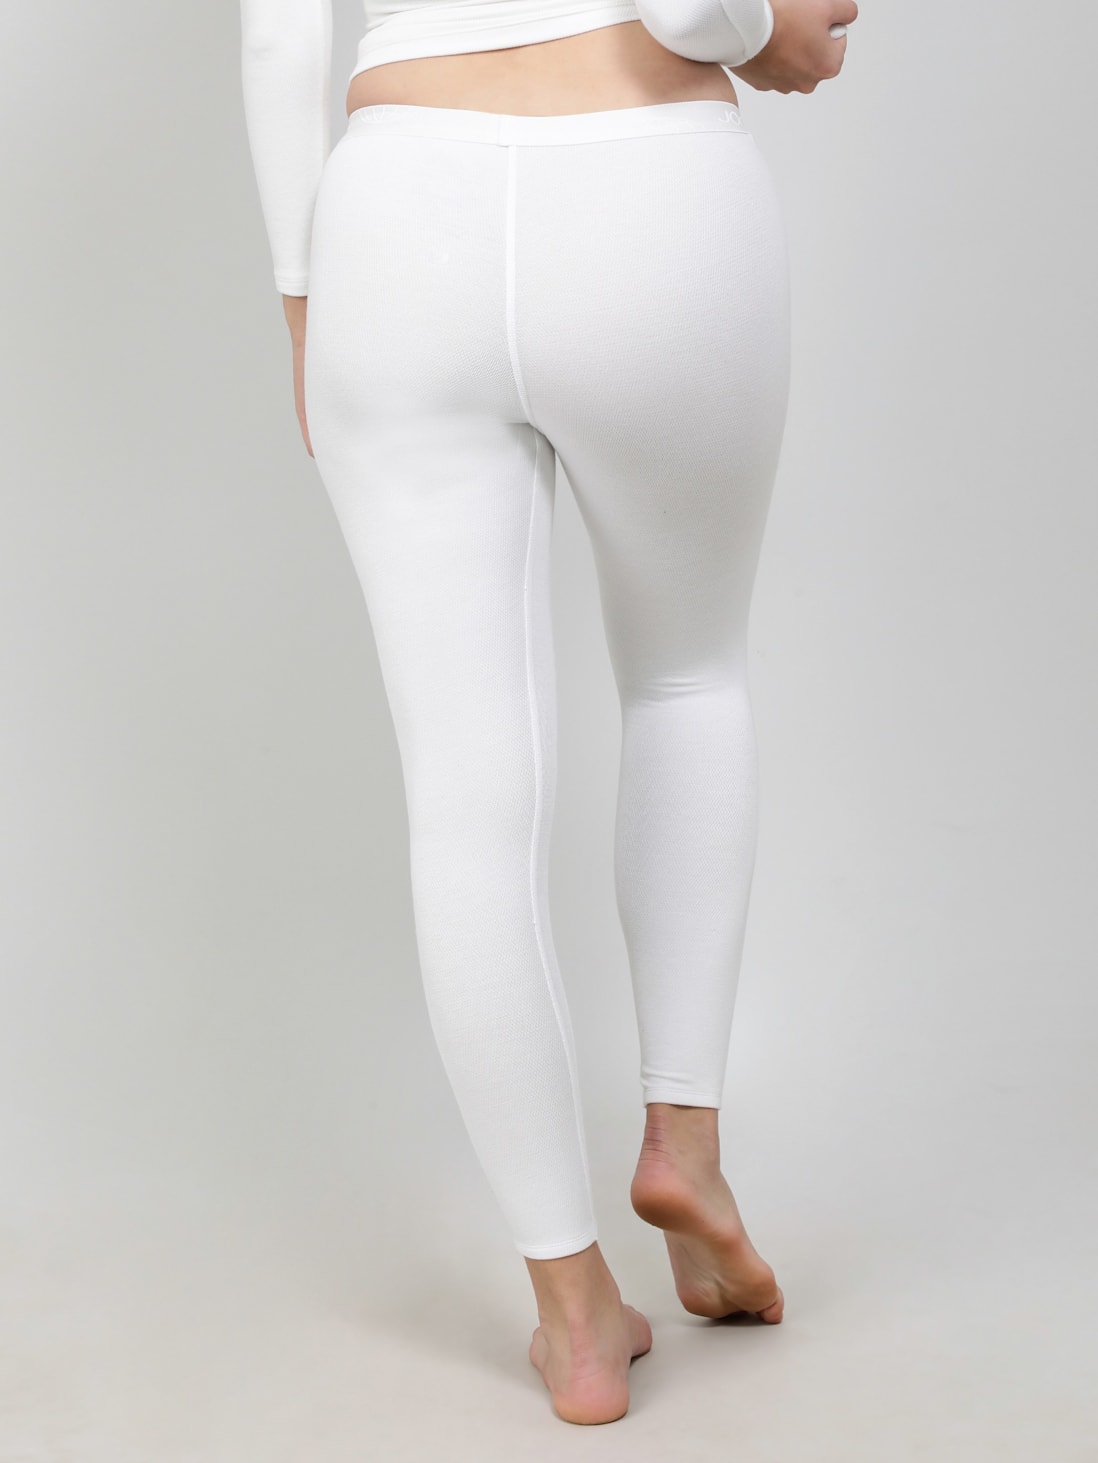 Skims Thermal Leggings Are 26% Off at Nordstrom-cacanhphuclong.com.vn